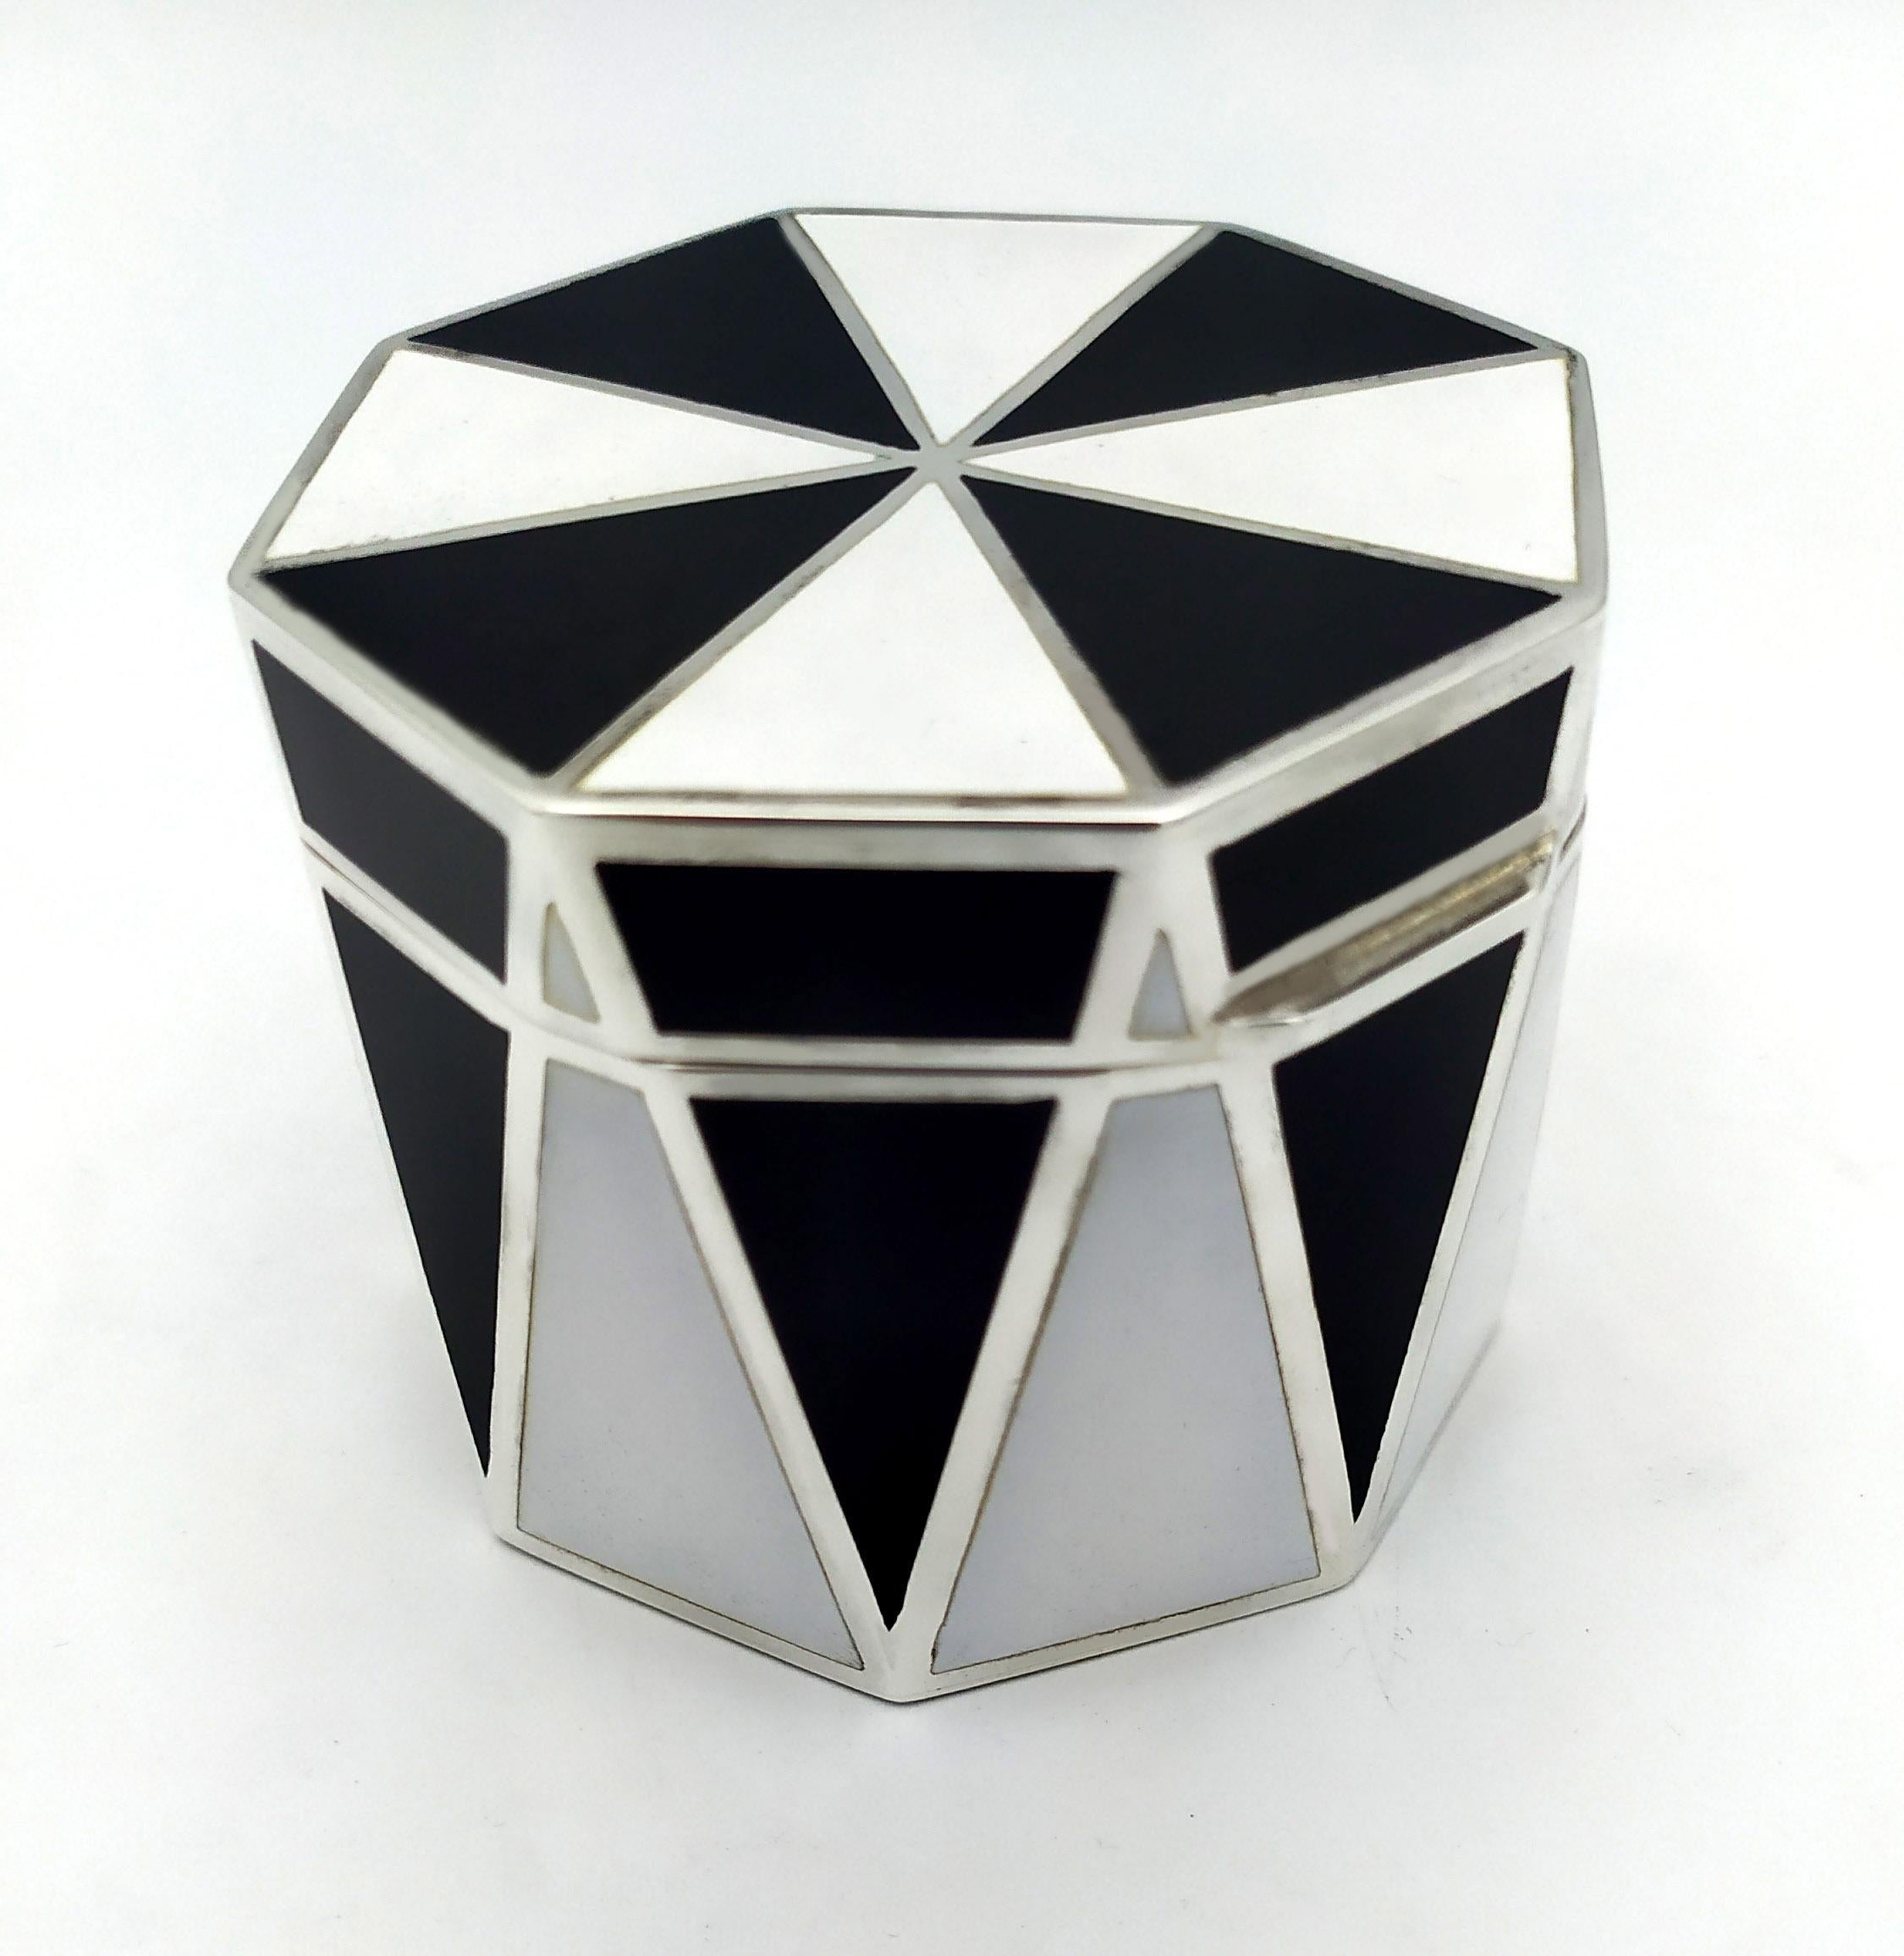 Octagonal wedge box in 925/1000 sterling silver with black and white colors fire enameled in Art Deco style. Measures 7.8 x 7.8 x 6 cm. Weight gr. 281. Designed by Giorgio Salimbeni in 1978 and produced in the Salimbeni factory with handwork by